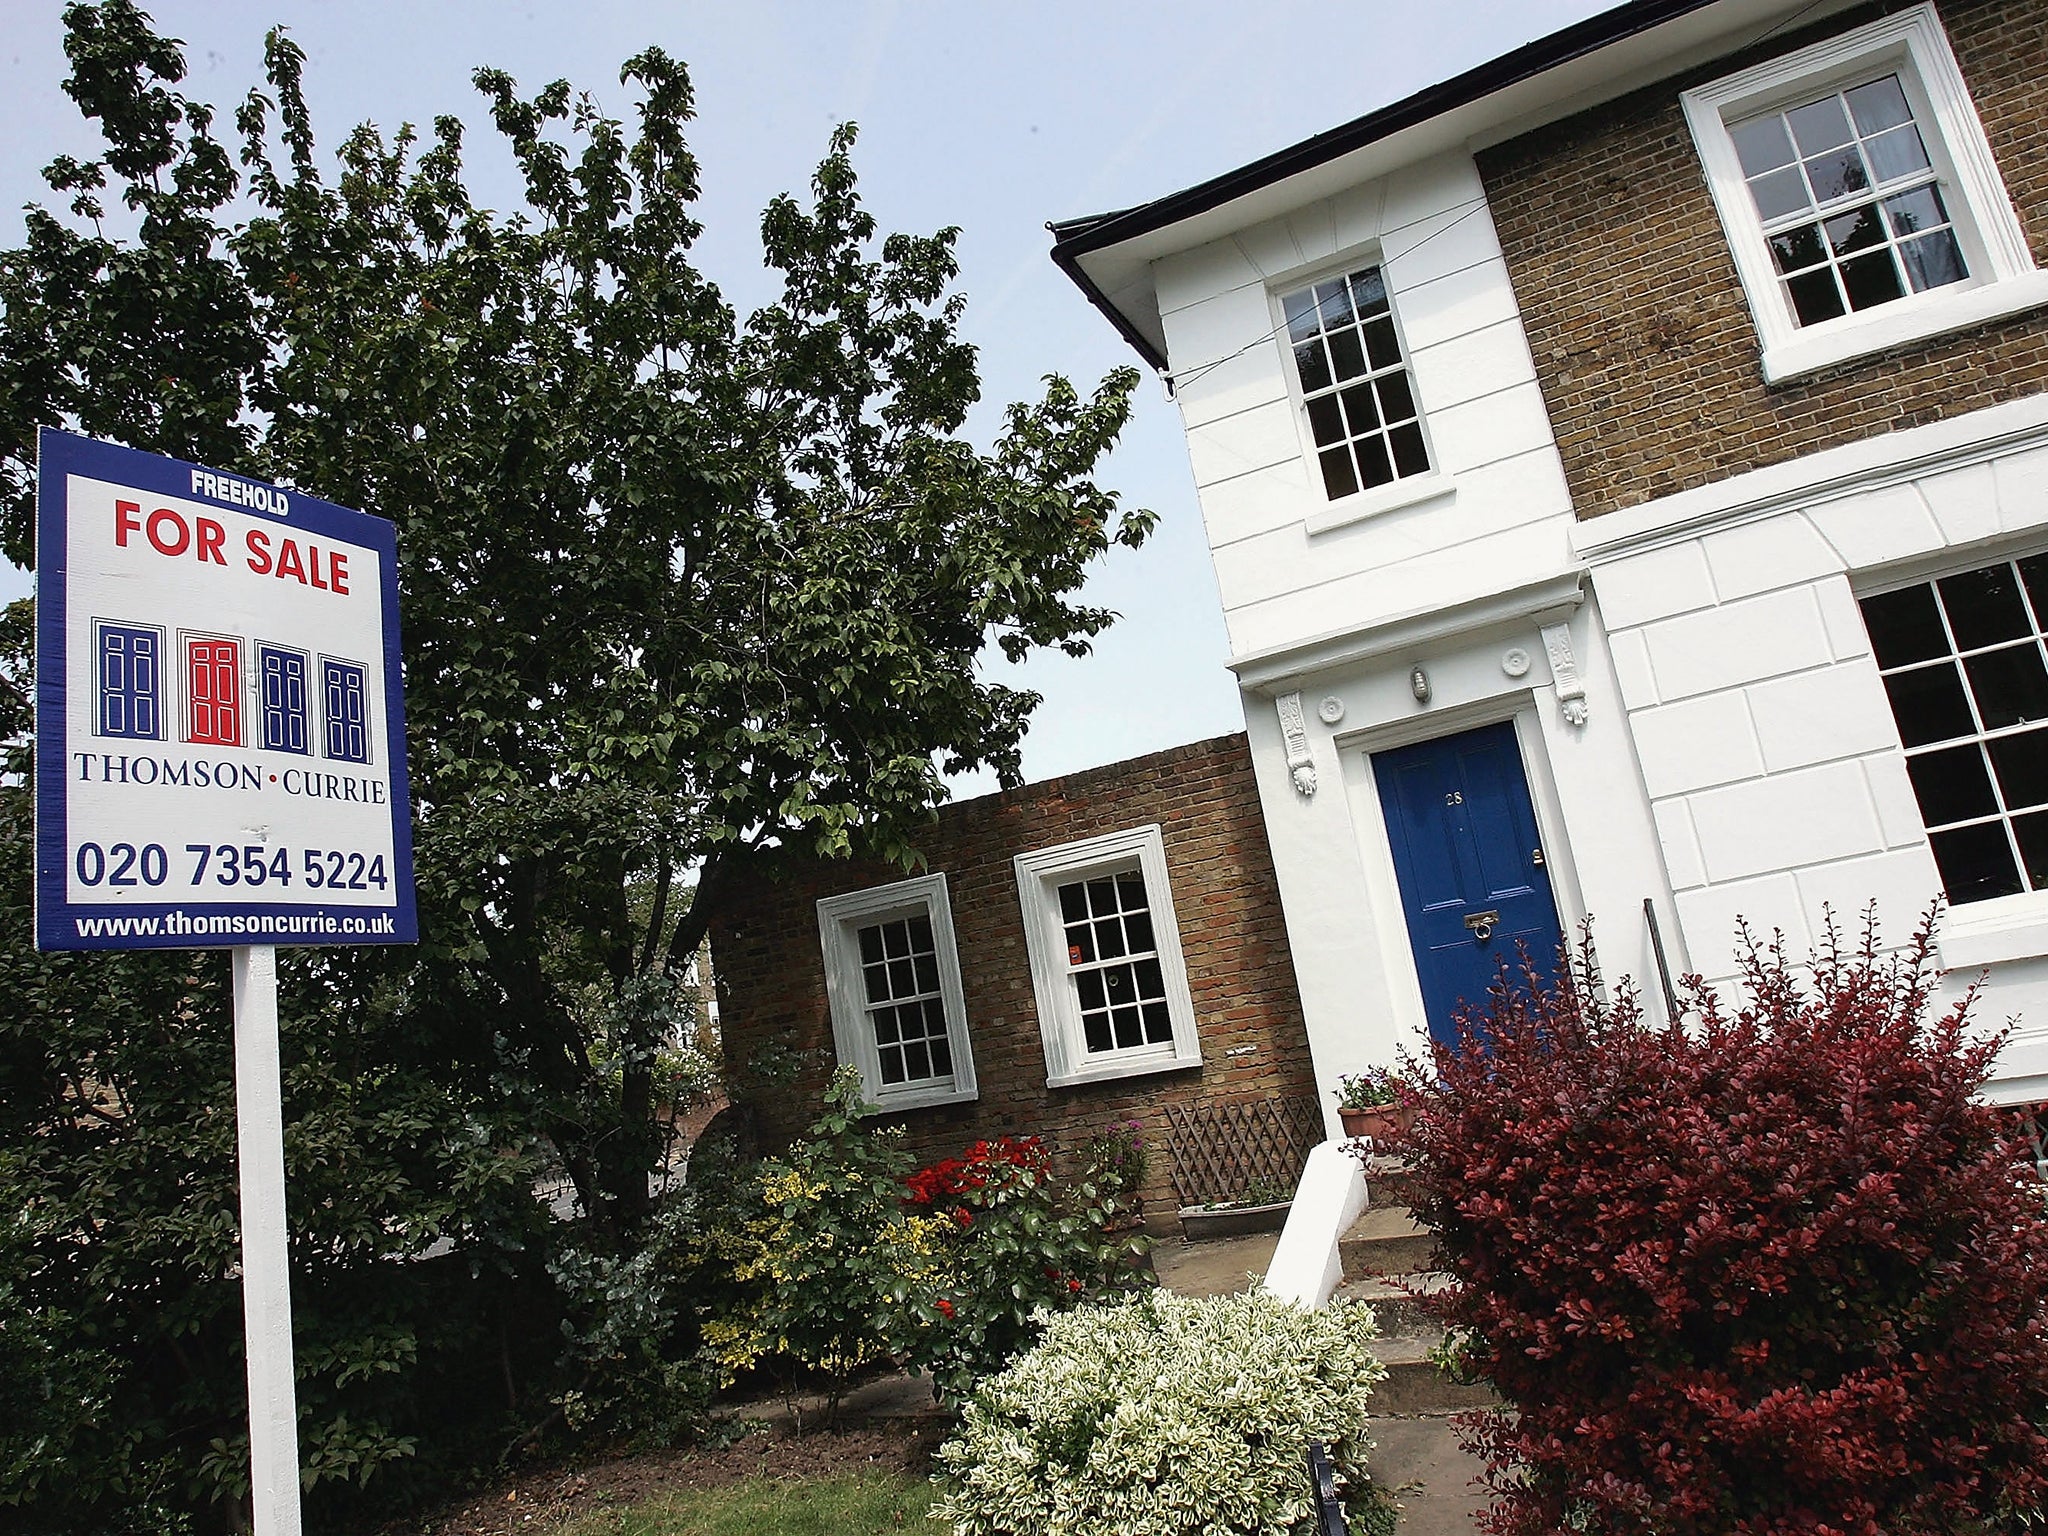 The government’s spending watchdog forecasts that house prices will fall 6 per cent in 2020 if there is a no-deal Brexit.